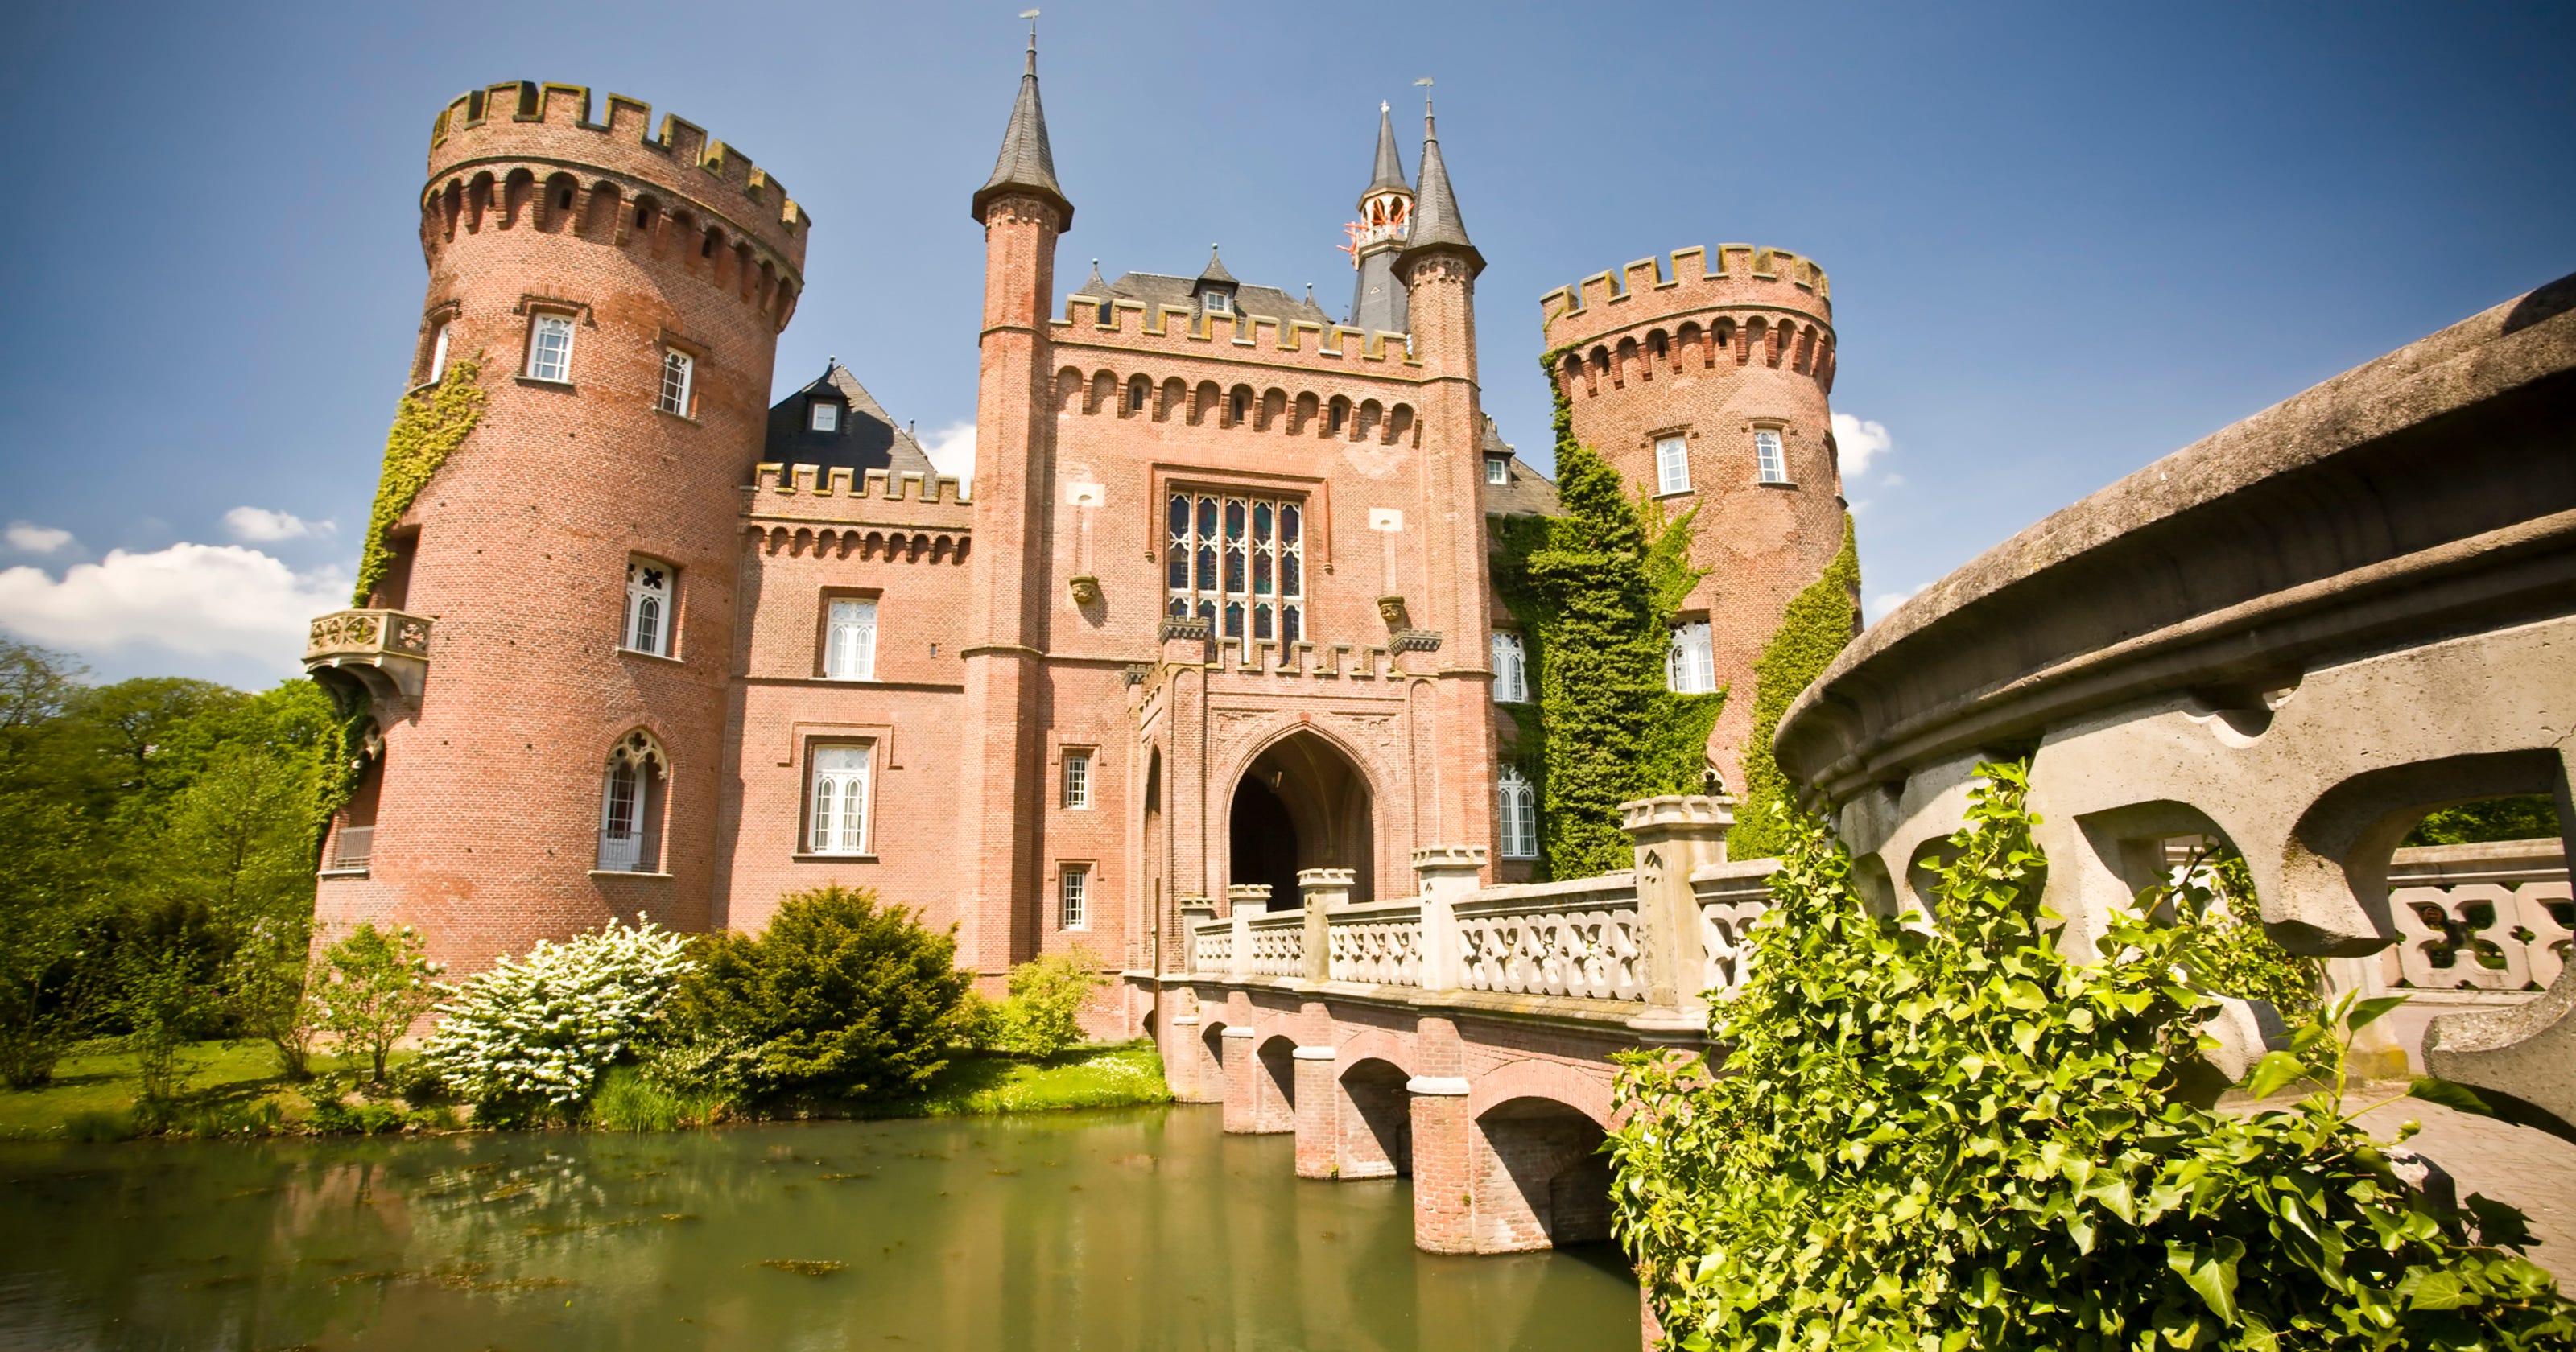 The fairy tale castles of Germany